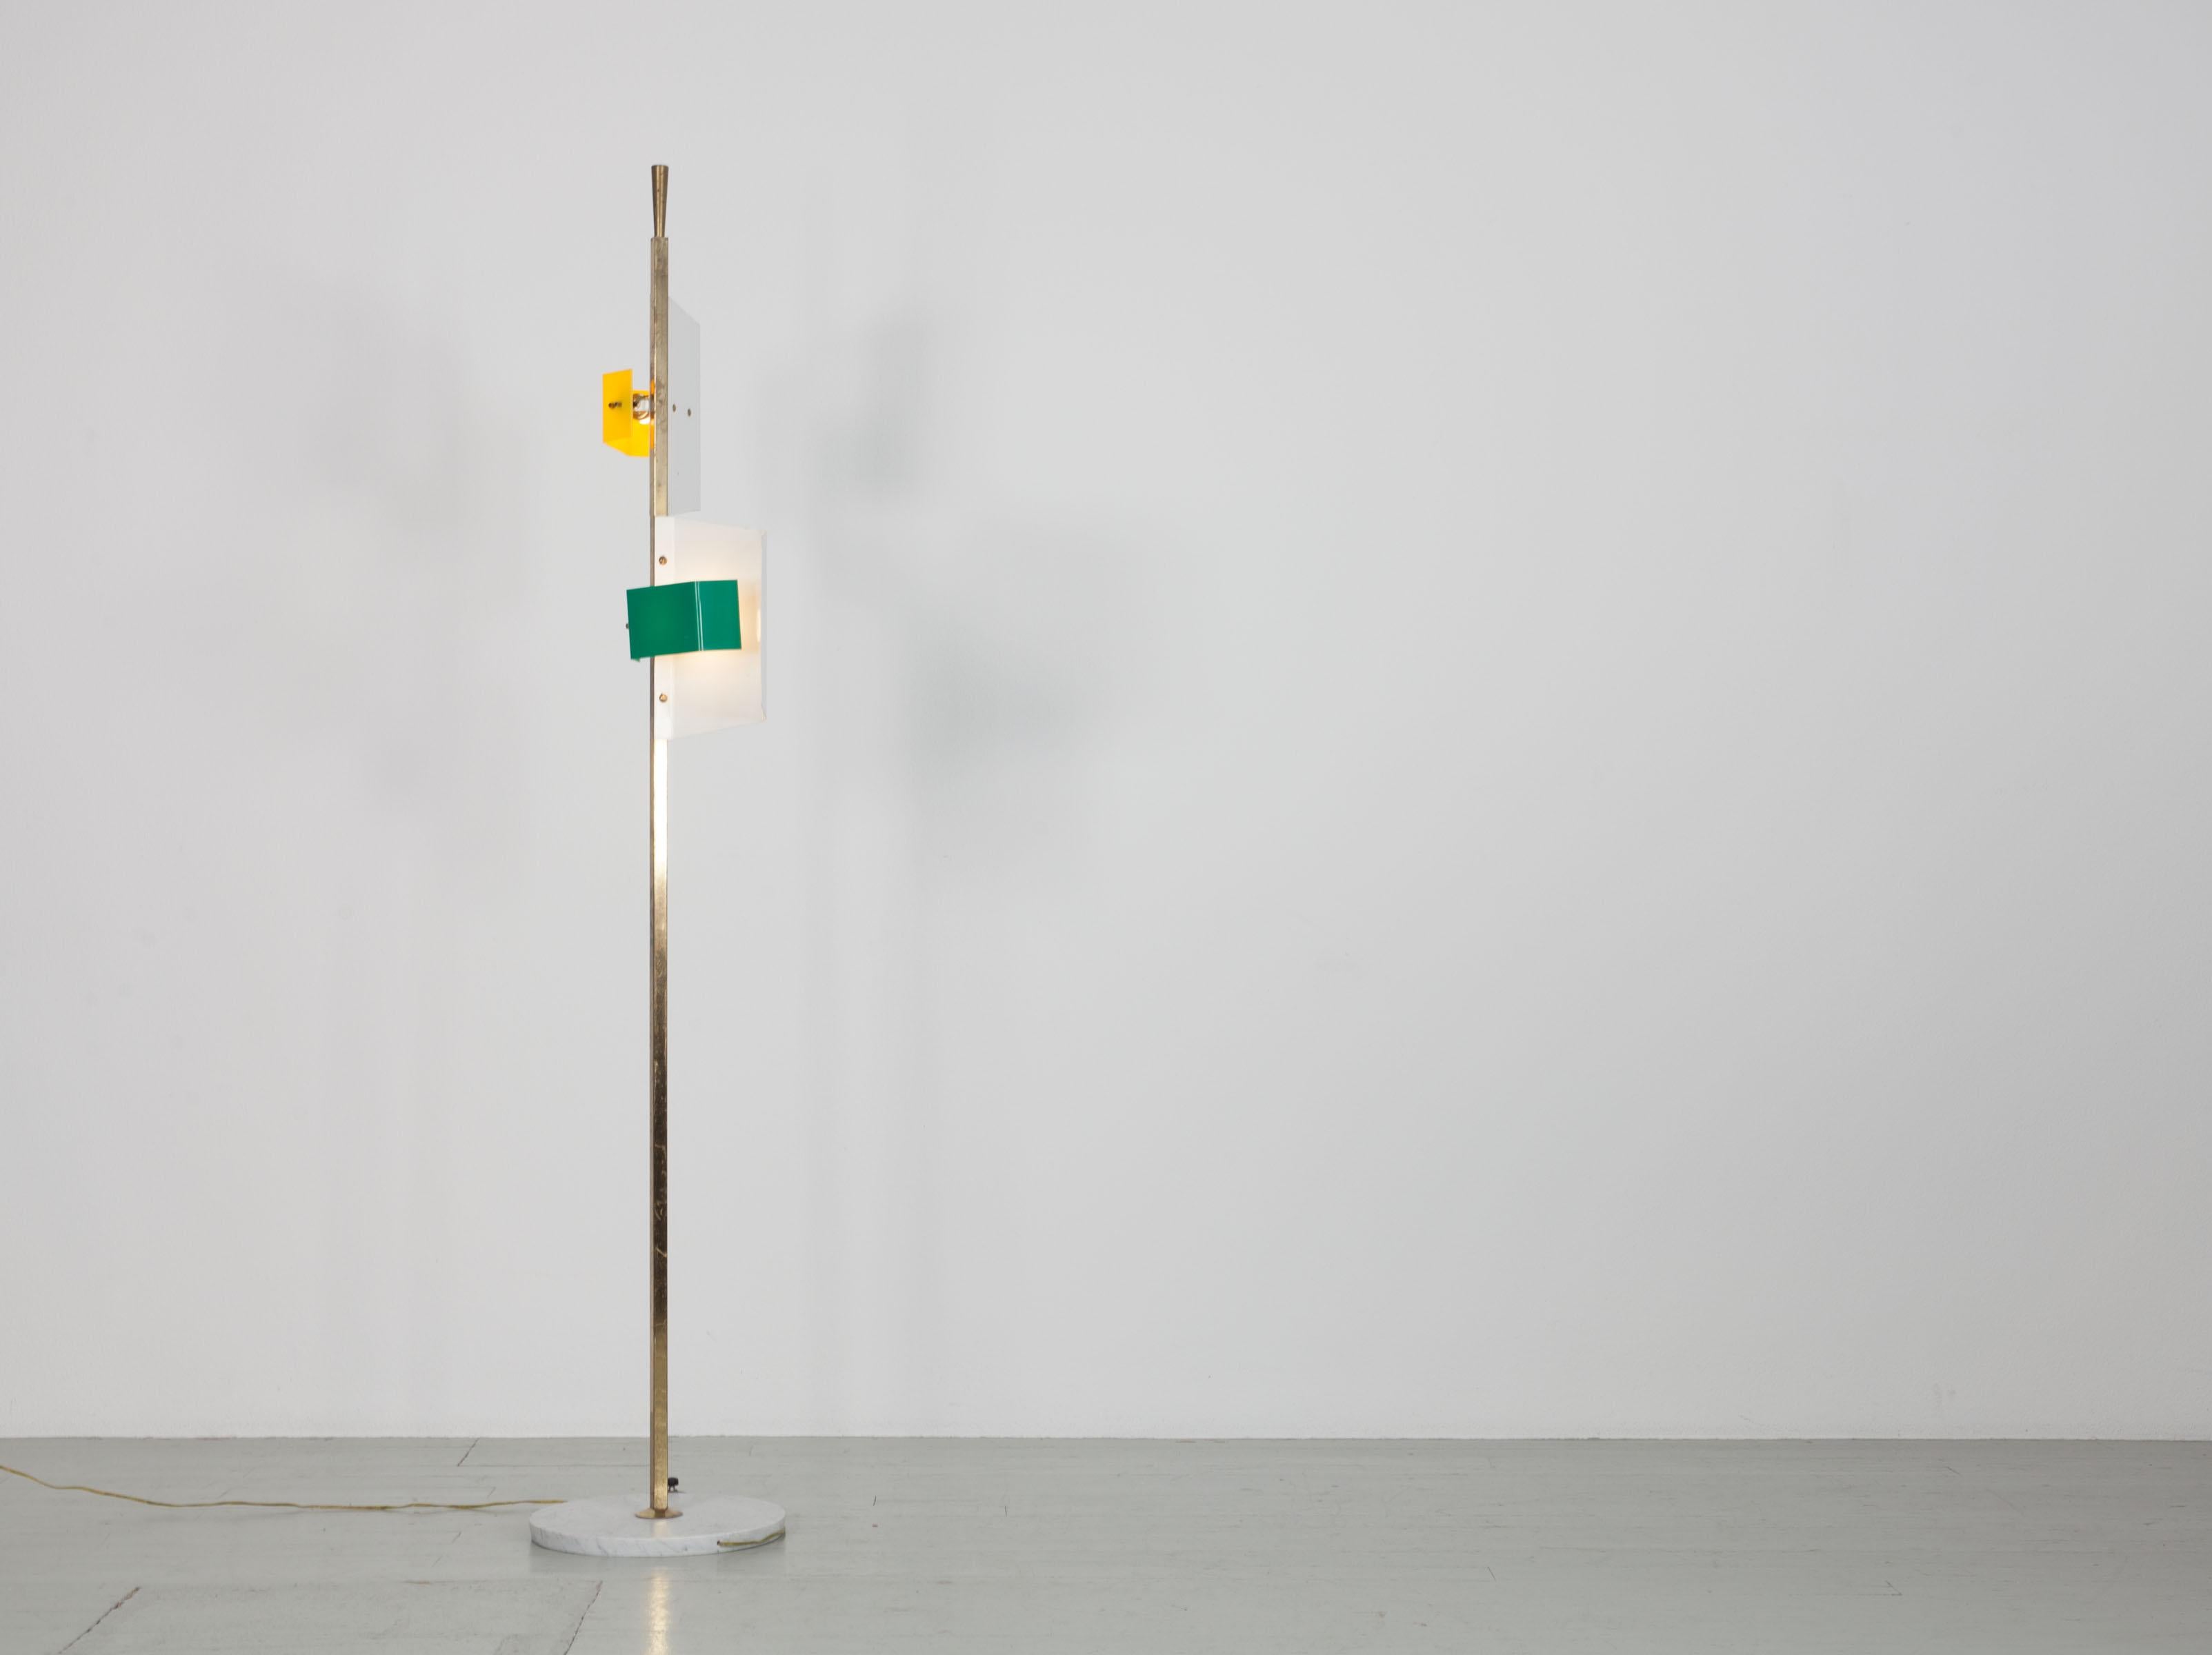 Italian Stilnovo floor lamp from the 50s. The lamp has two lampshades made of white painted metal and one green and yellow plastic element each. The rod of the lamp is made of brass and the base is made of marble. It has two E27 sockets. Except for